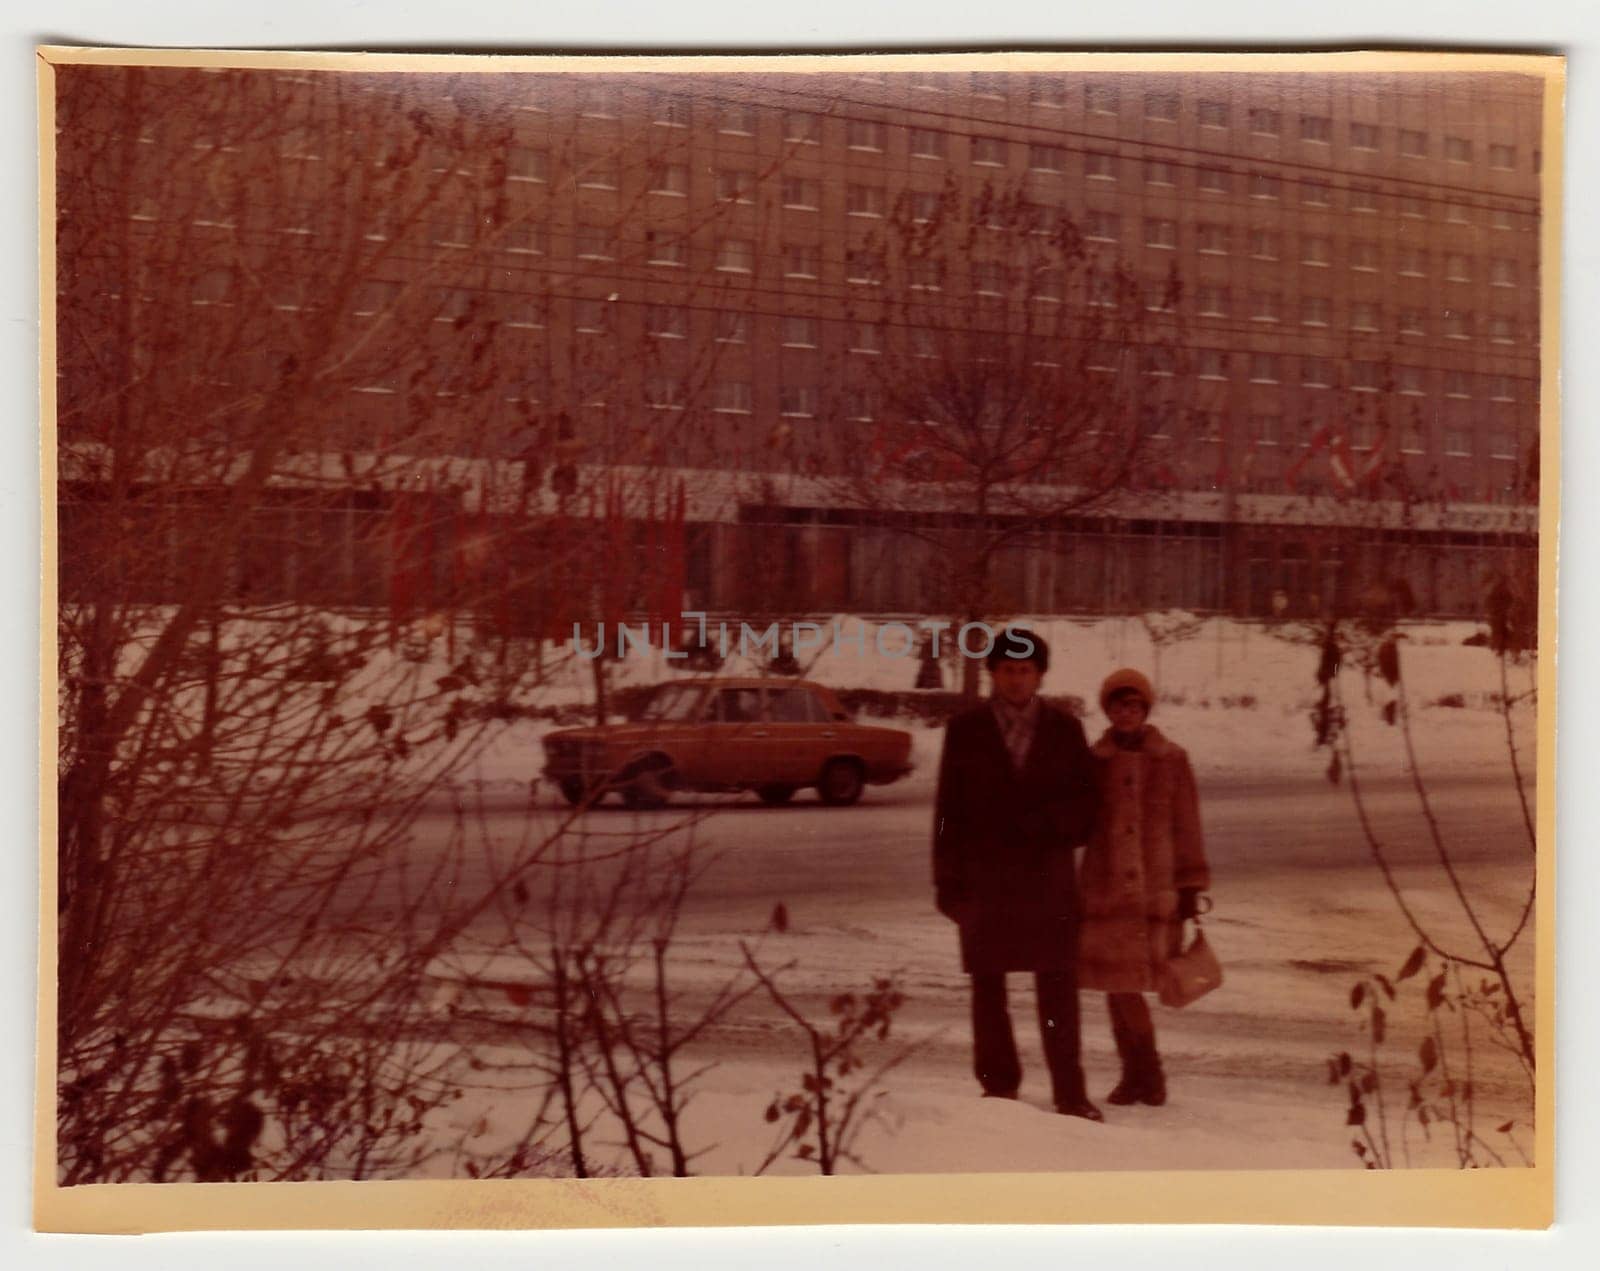 Vintage photo shows couple poses on the street in winter. by roman_nerud